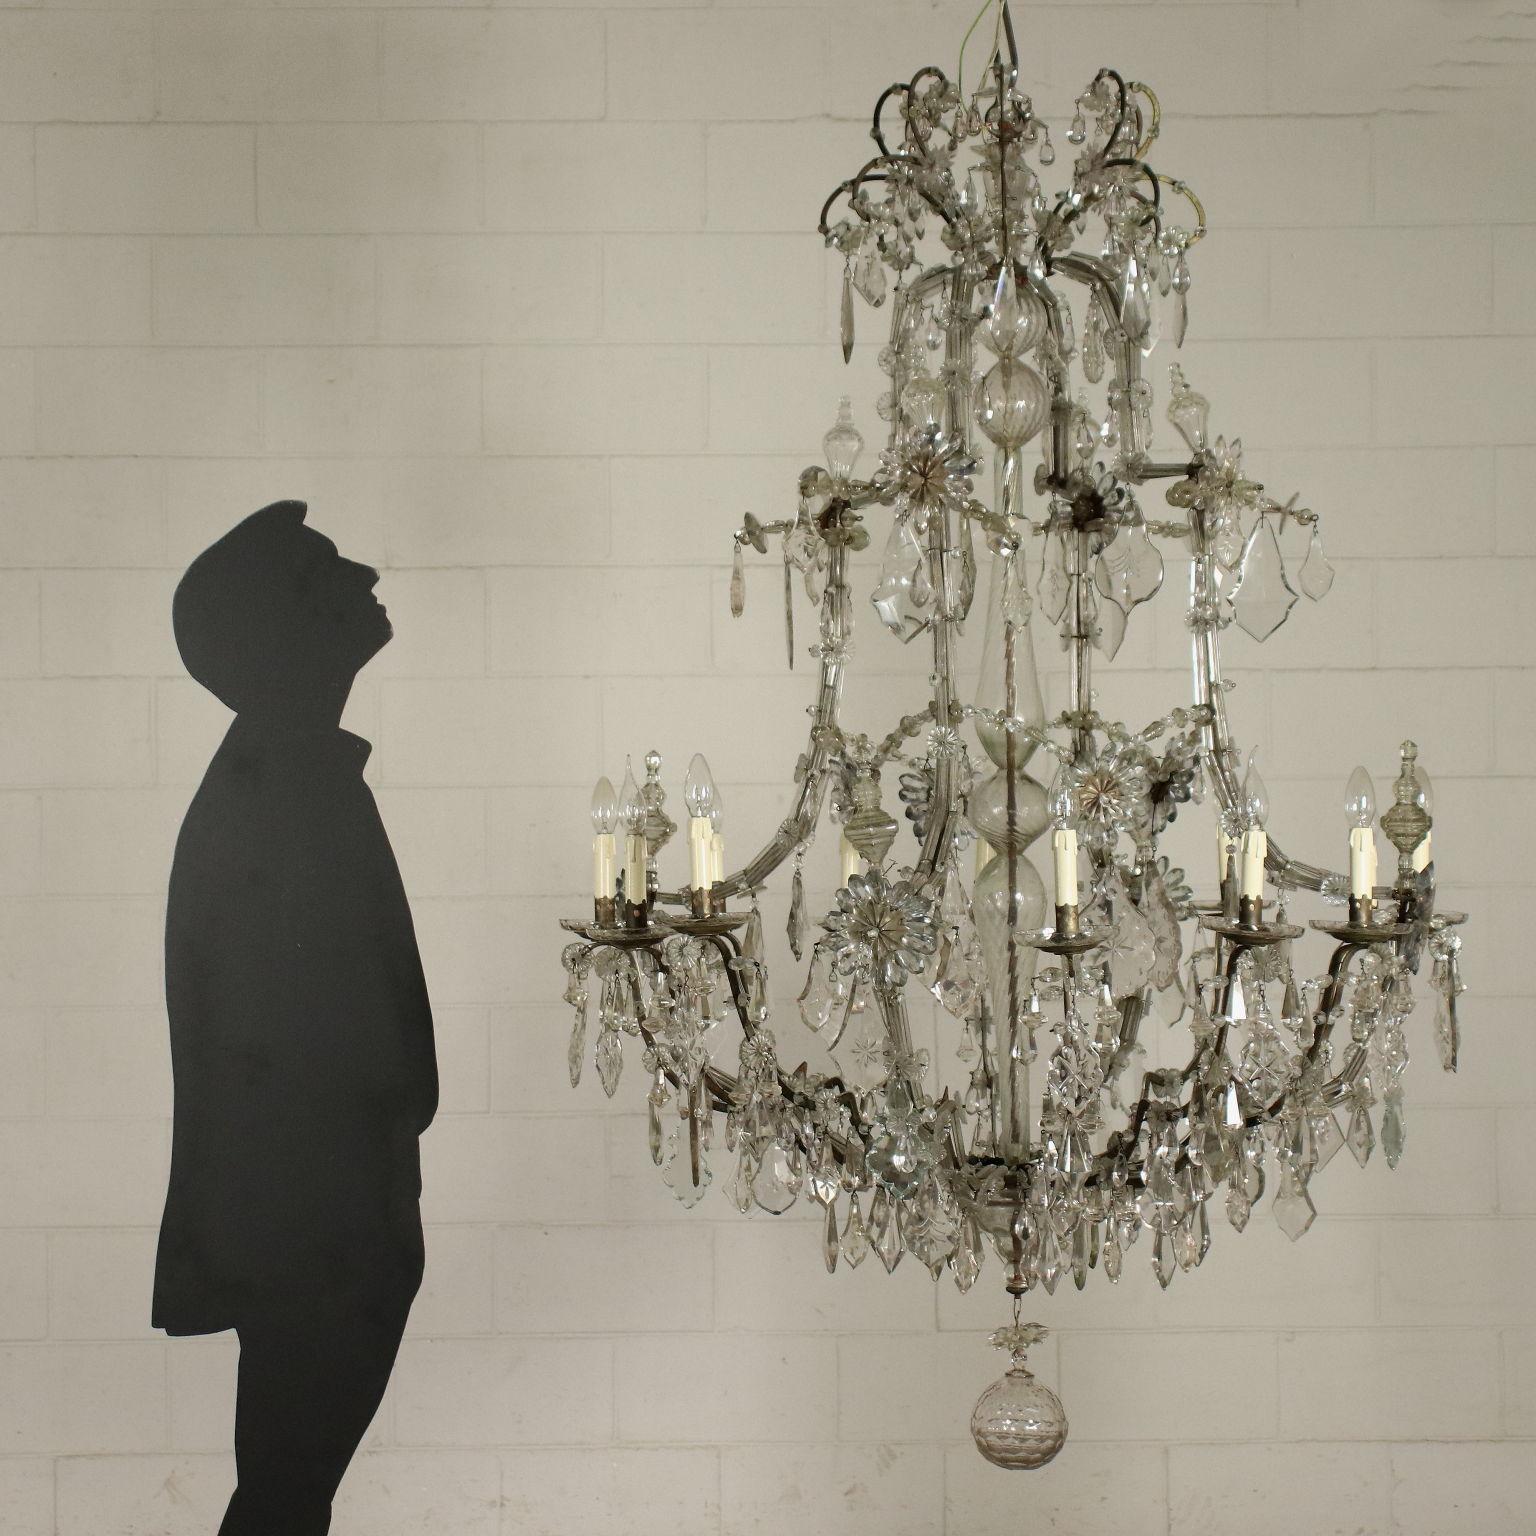 Marie Theresa chandelier with 12 lights, dating back to the end of the 18th century. Iron branches, the supporting ones are covered in glass, the bobeches are in cast bronze. The chandelier is adorned with bevelled glass pendants and adorned with